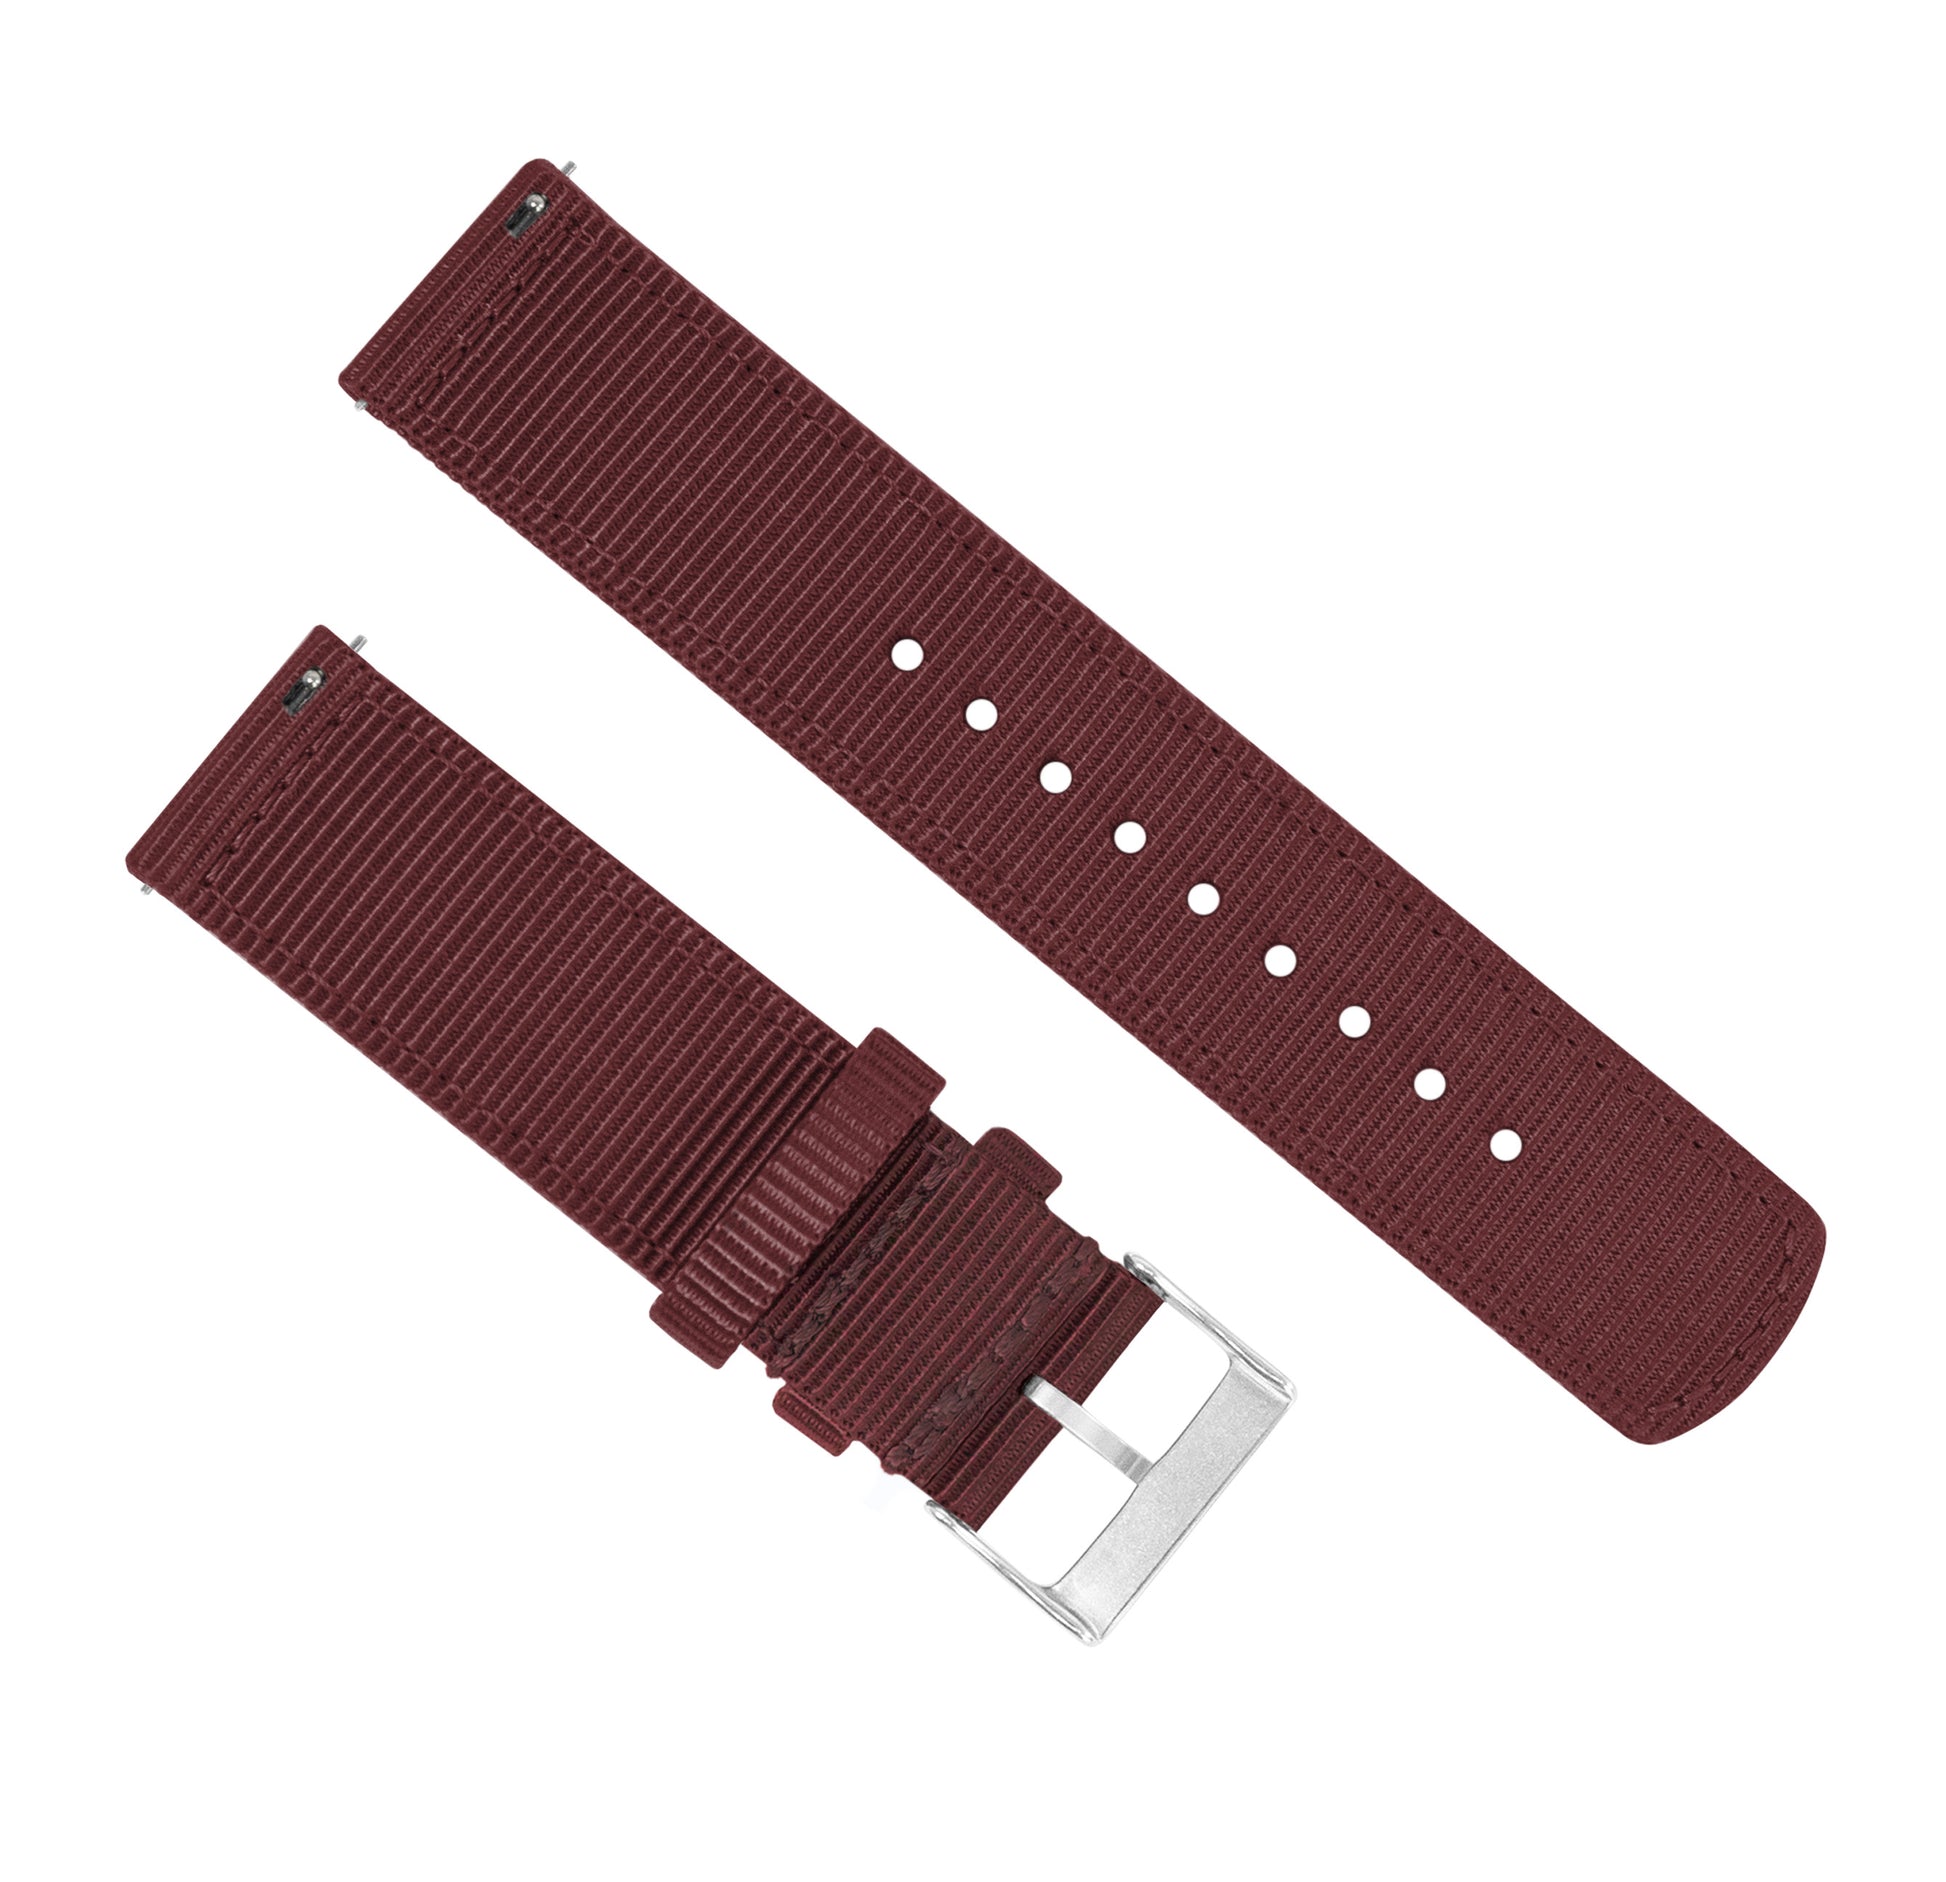 Fossil Q | Two-Piece NATO Style | Merlot - Barton Watch Bands